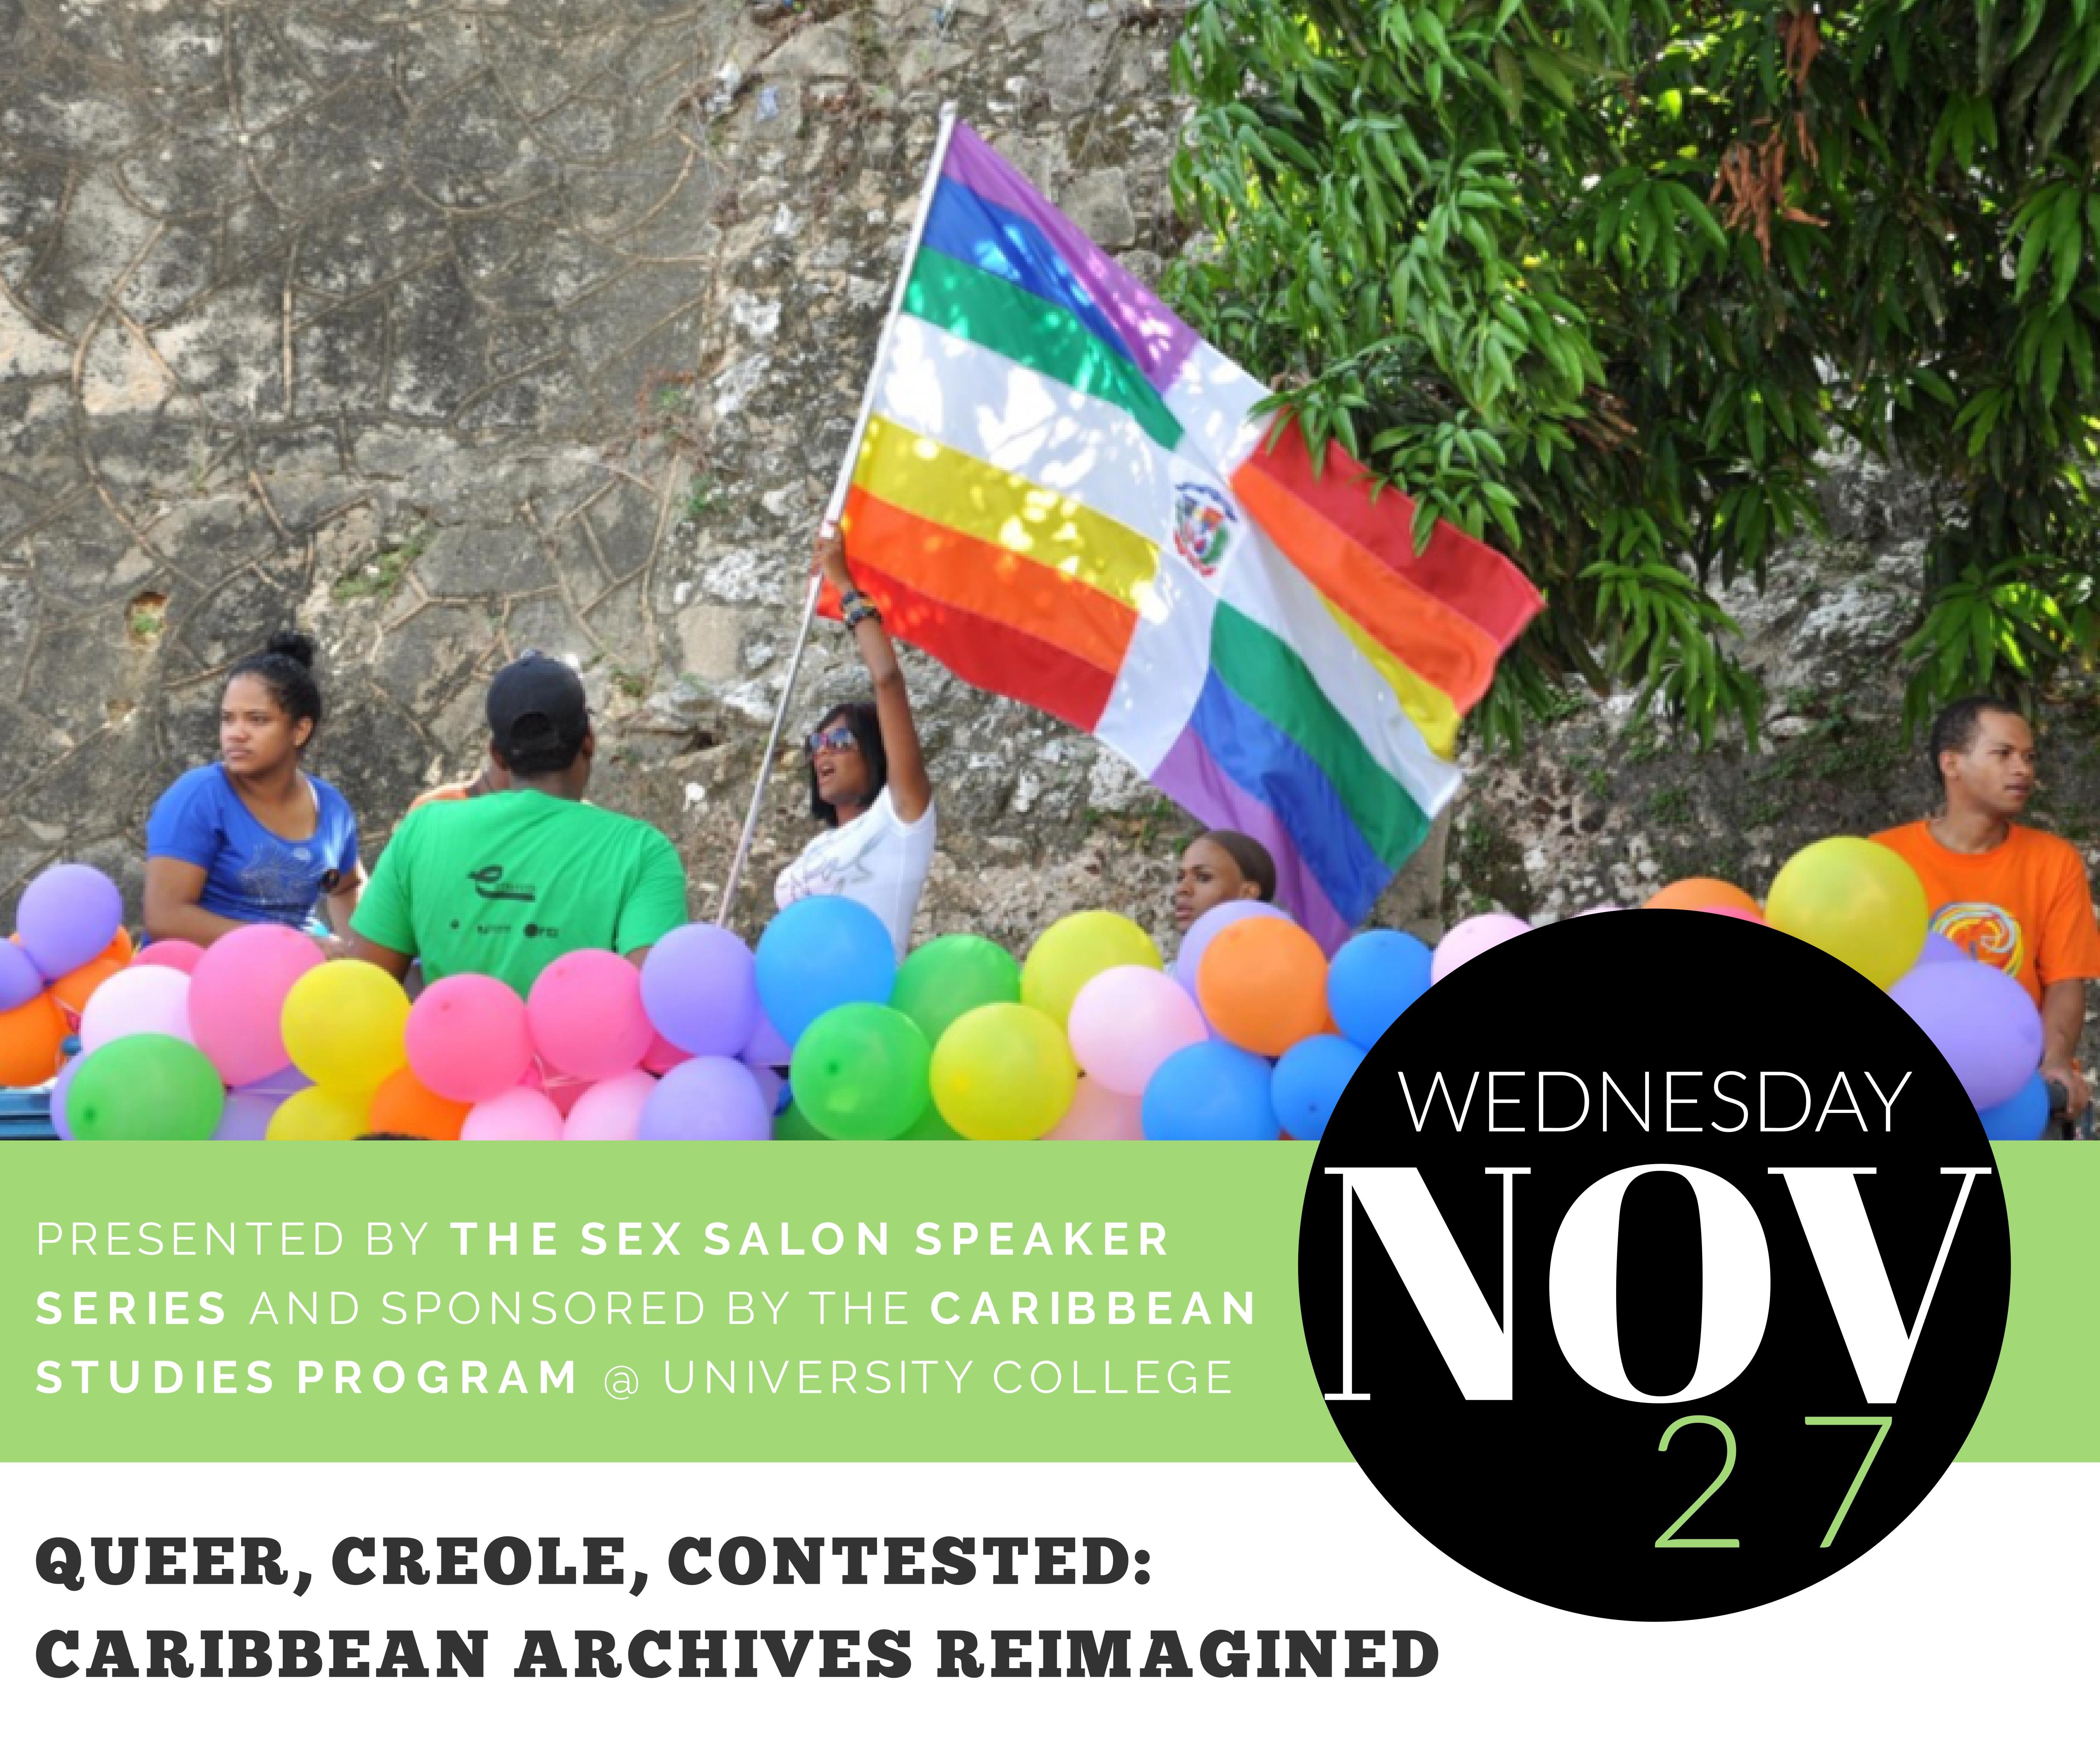 Queer, Creole, Contested: Caribbean Archives Reimagined